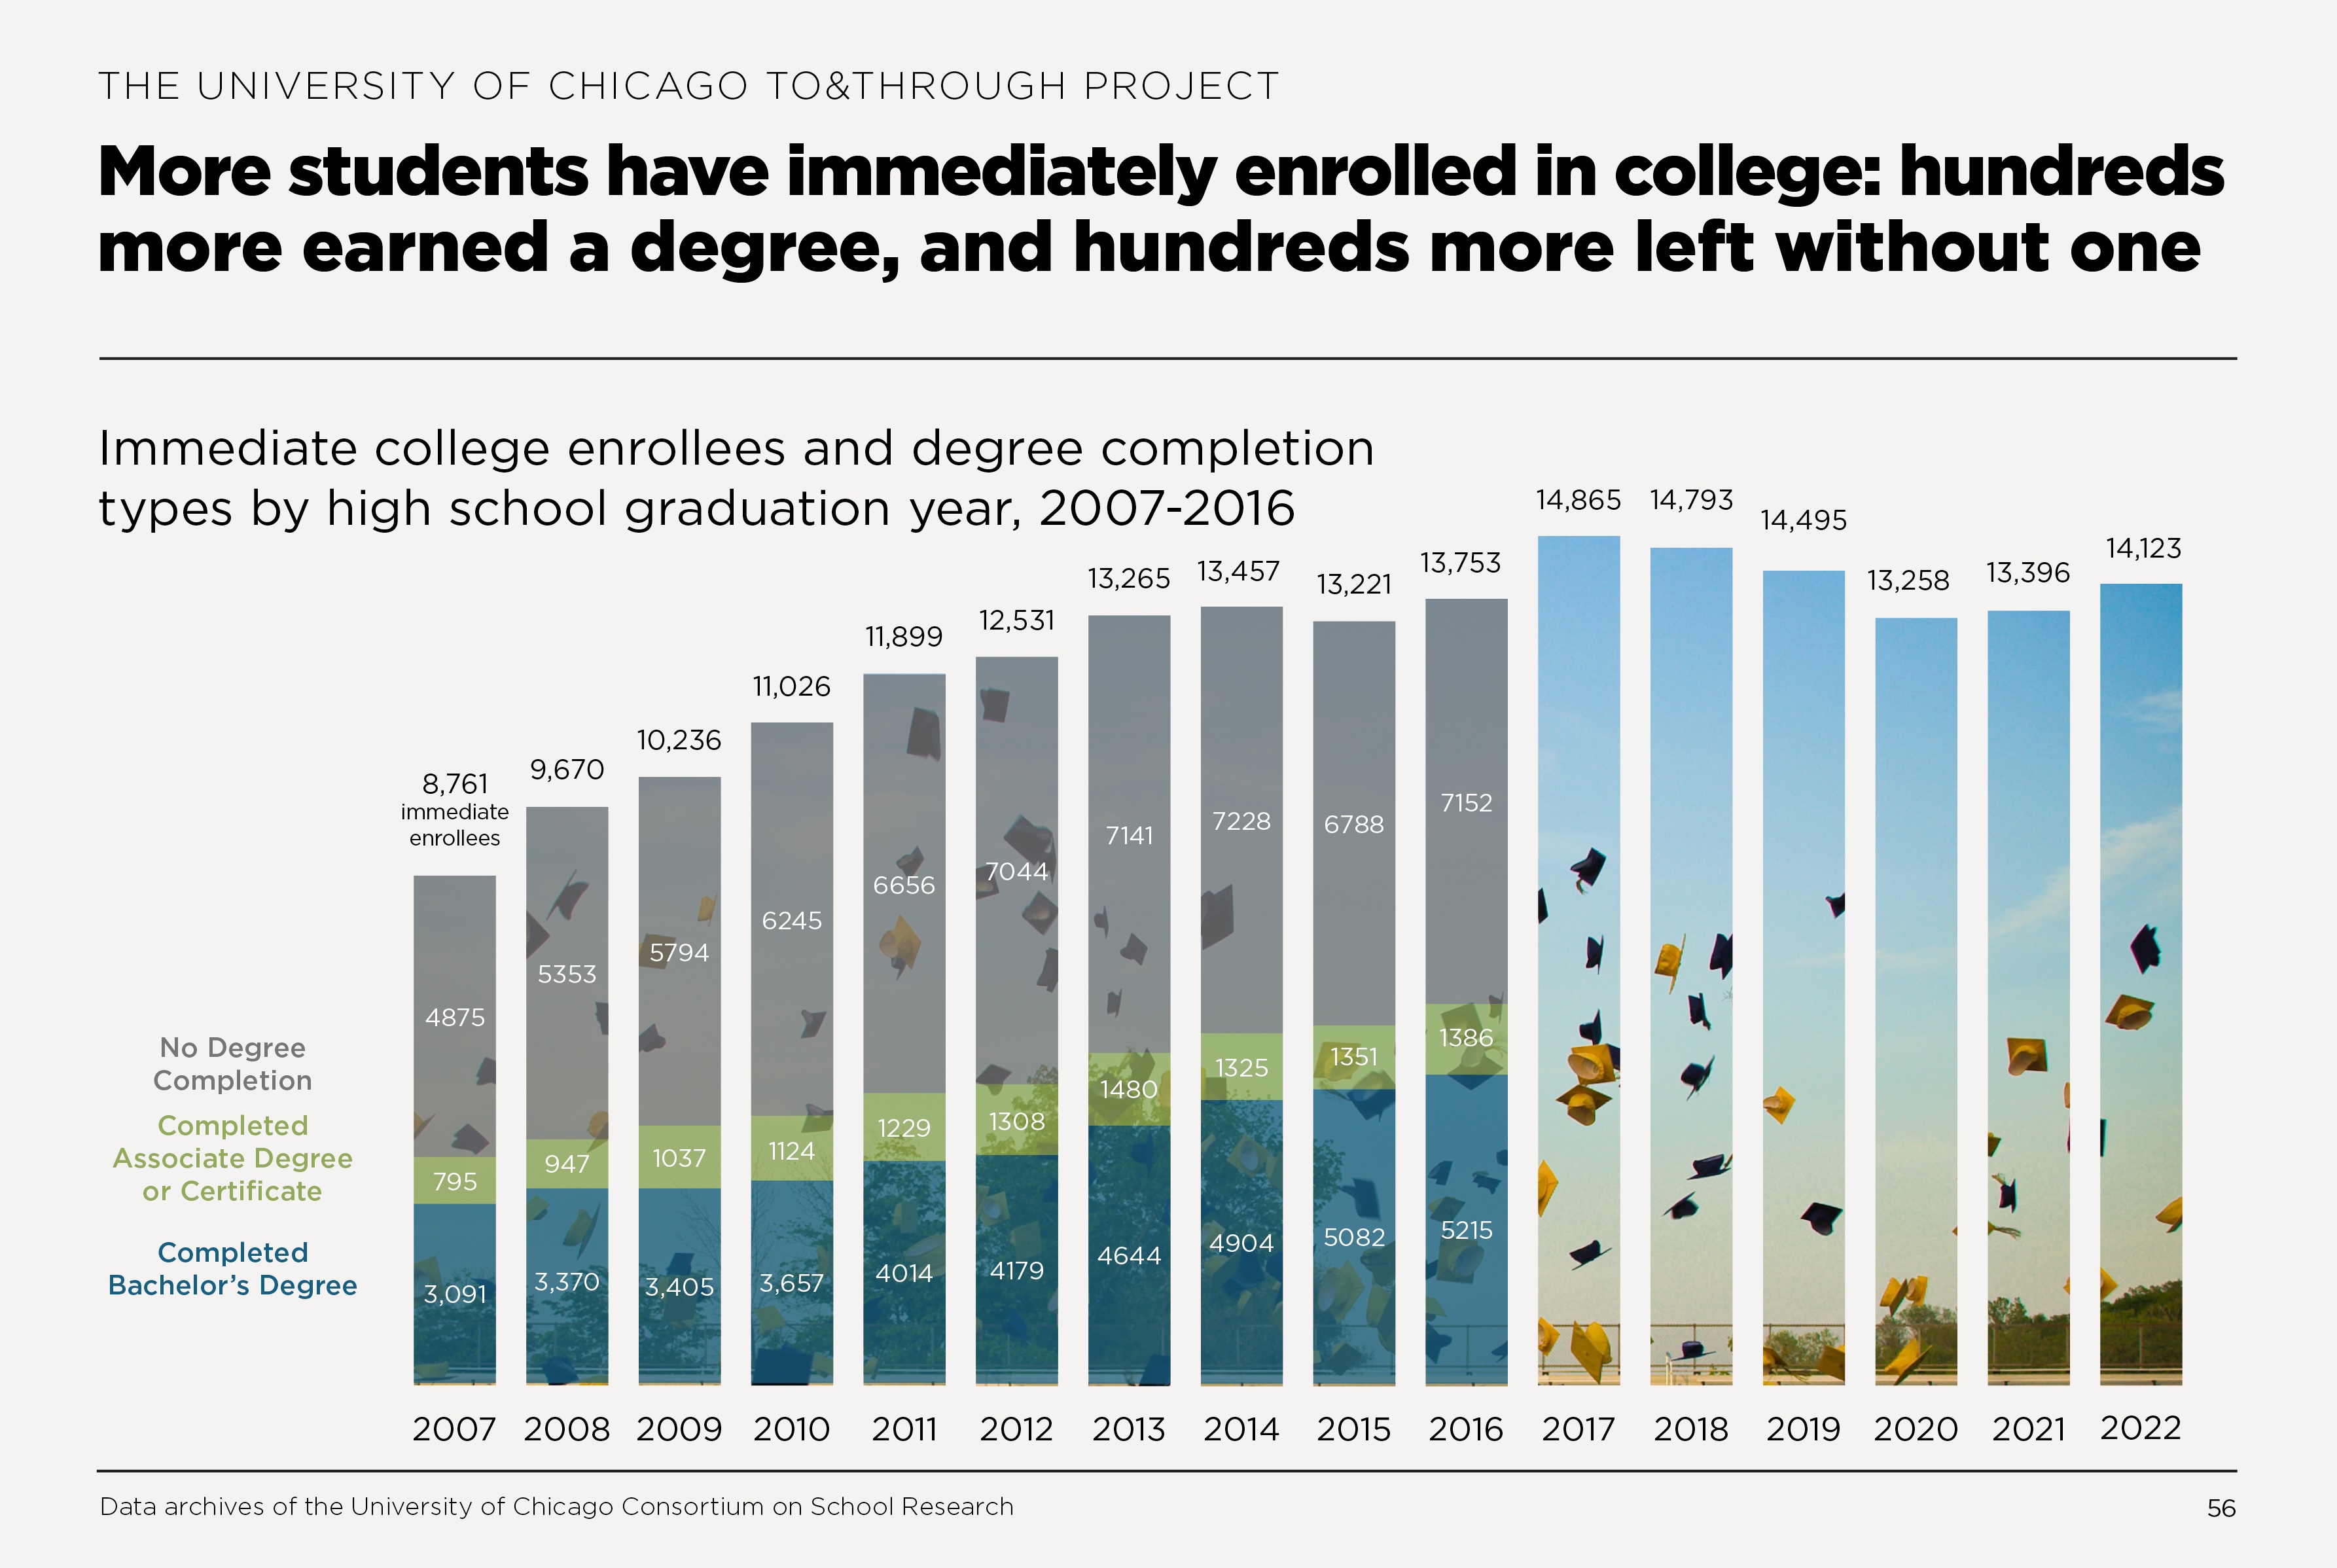 More students have immediately enrolled in college:hundreds more earned a degree adn hundreds left college without one